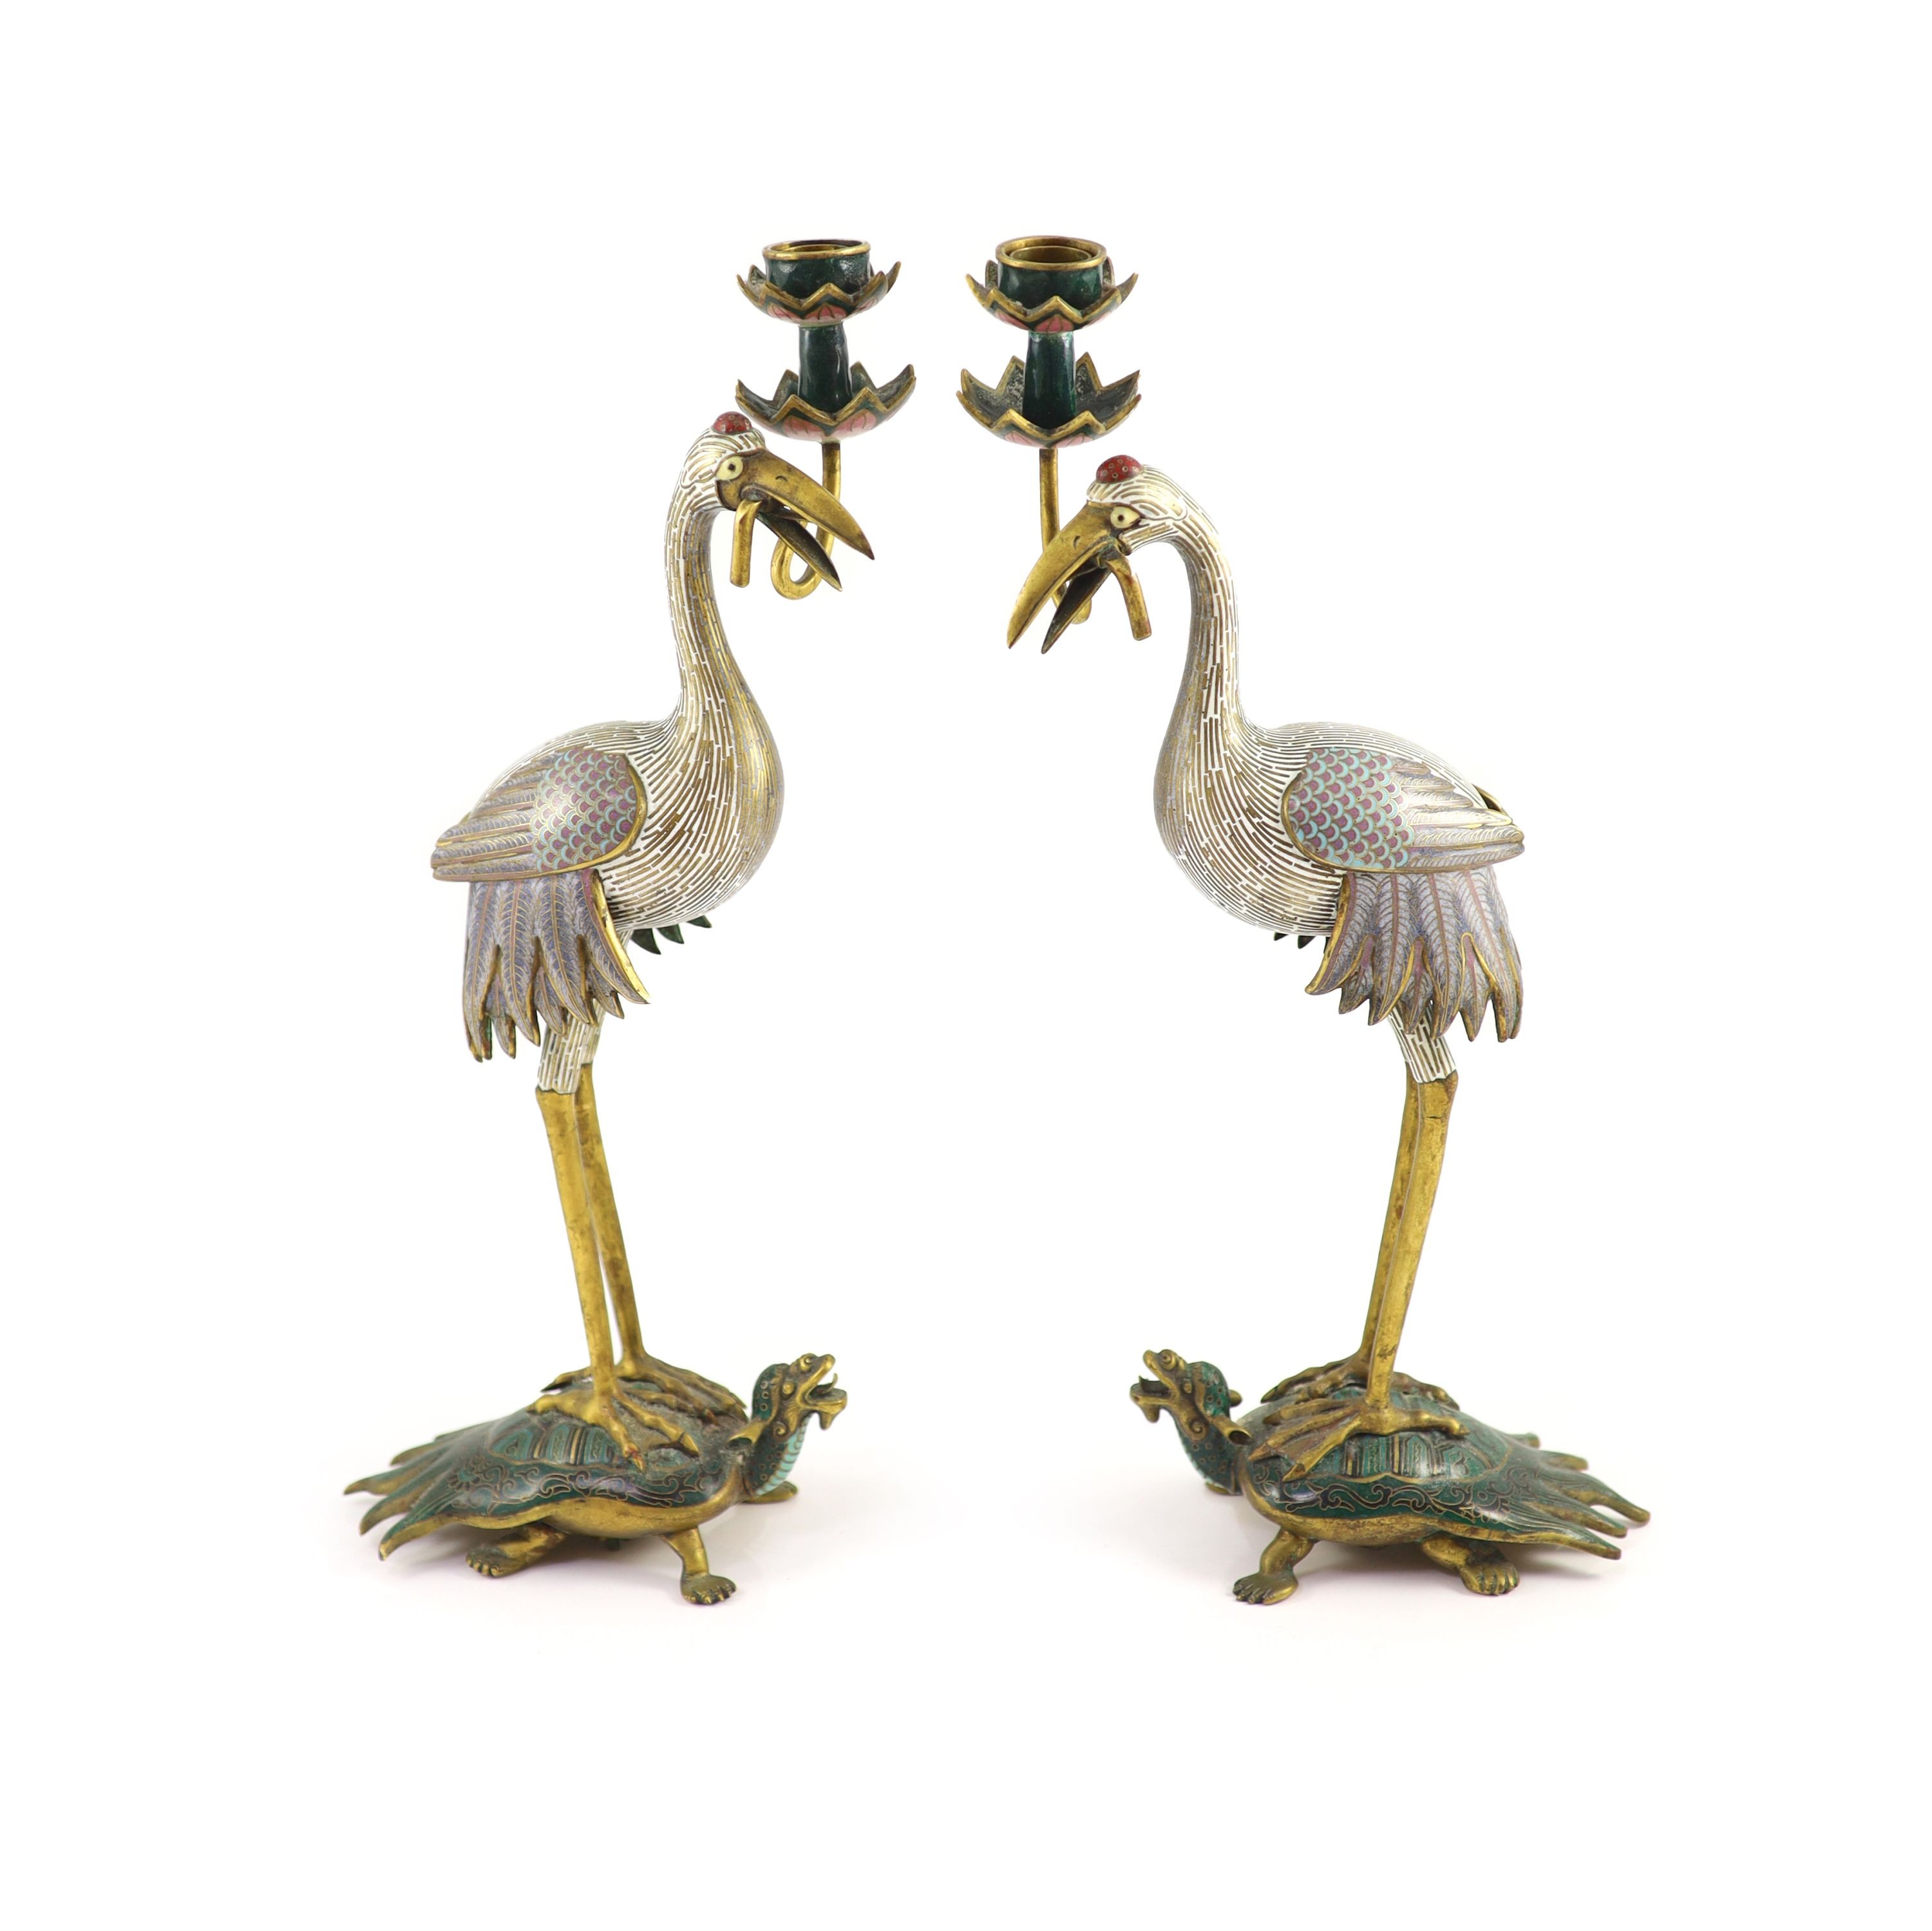 A pair of Chinese cloisonné enamel and gilt bronze ’crane’ candlesticks, early 20th century, 38cm high